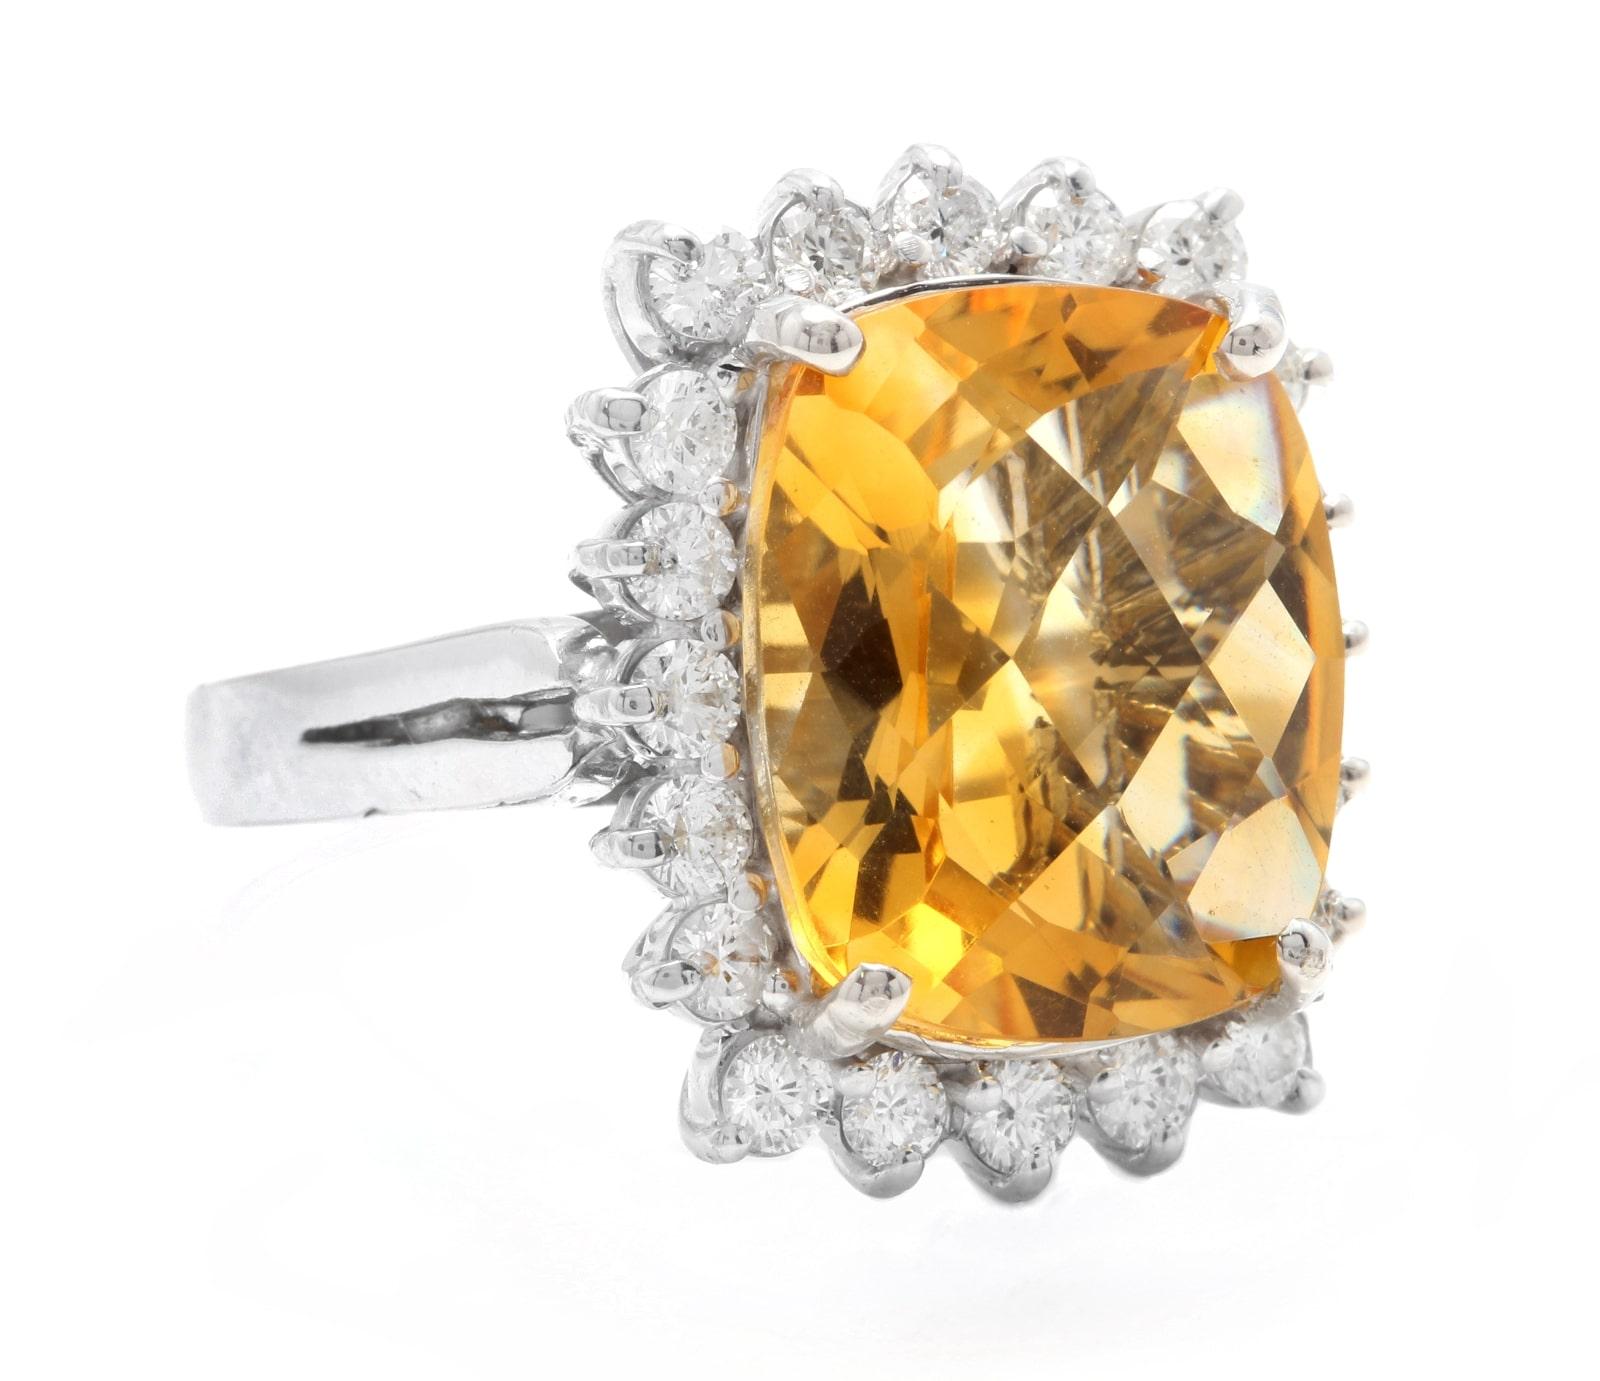 8.75 Carats Natural Very Nice Looking Citrine and Diamond 14K Solid White Gold Ring

Total Natural Cushion Citrine Weight is: Approx. 8.00 Carats

Citrine Measures: Approx. 14.00 x 12.00mm

Natural Round Diamonds Weight: Approx. 0.75 Carats (color